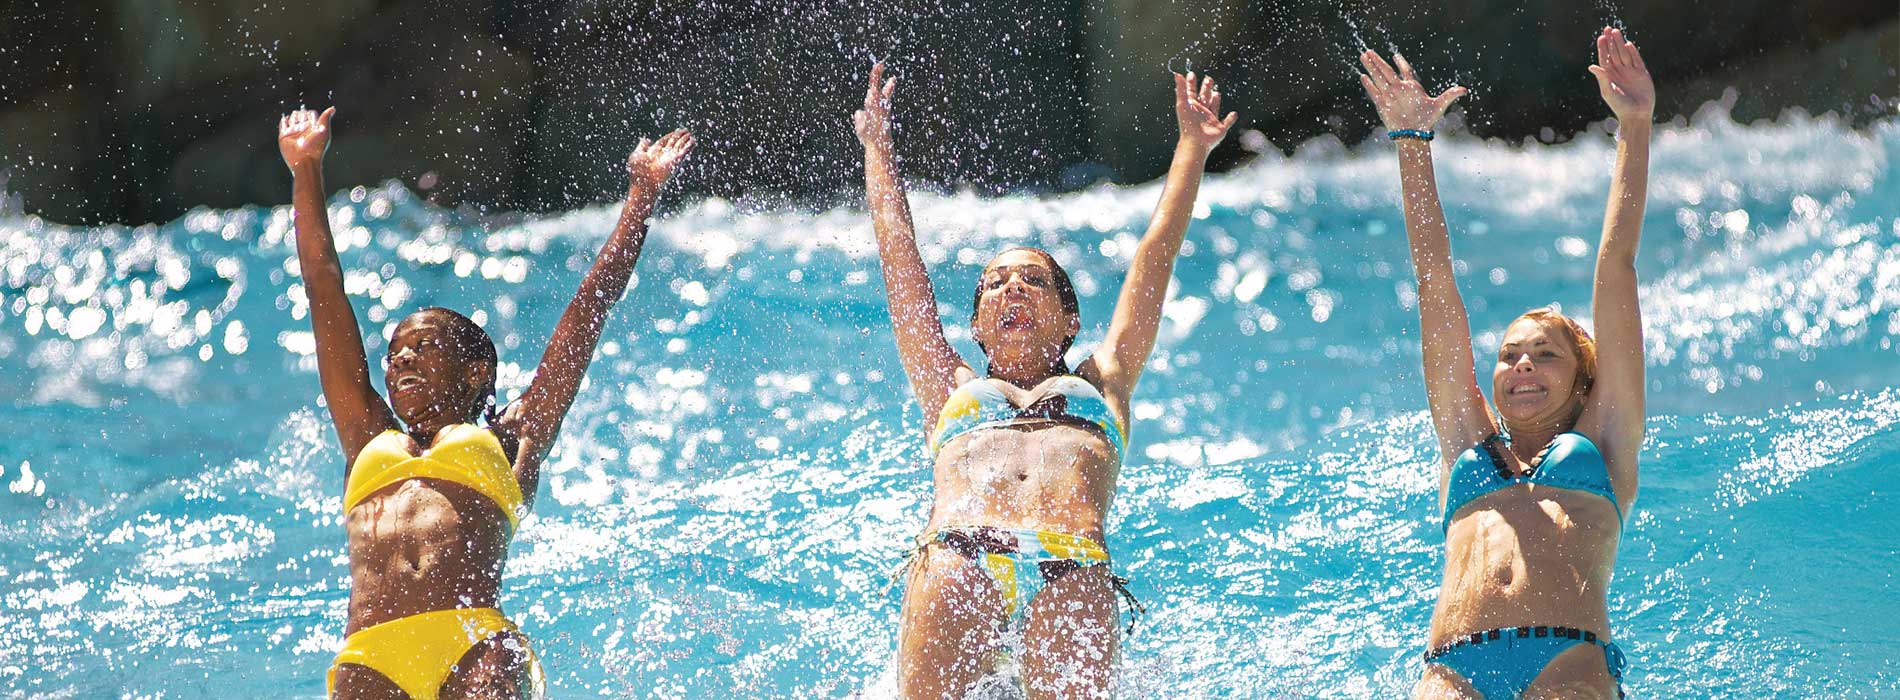 Splash and play in the wave pools at Aquatica